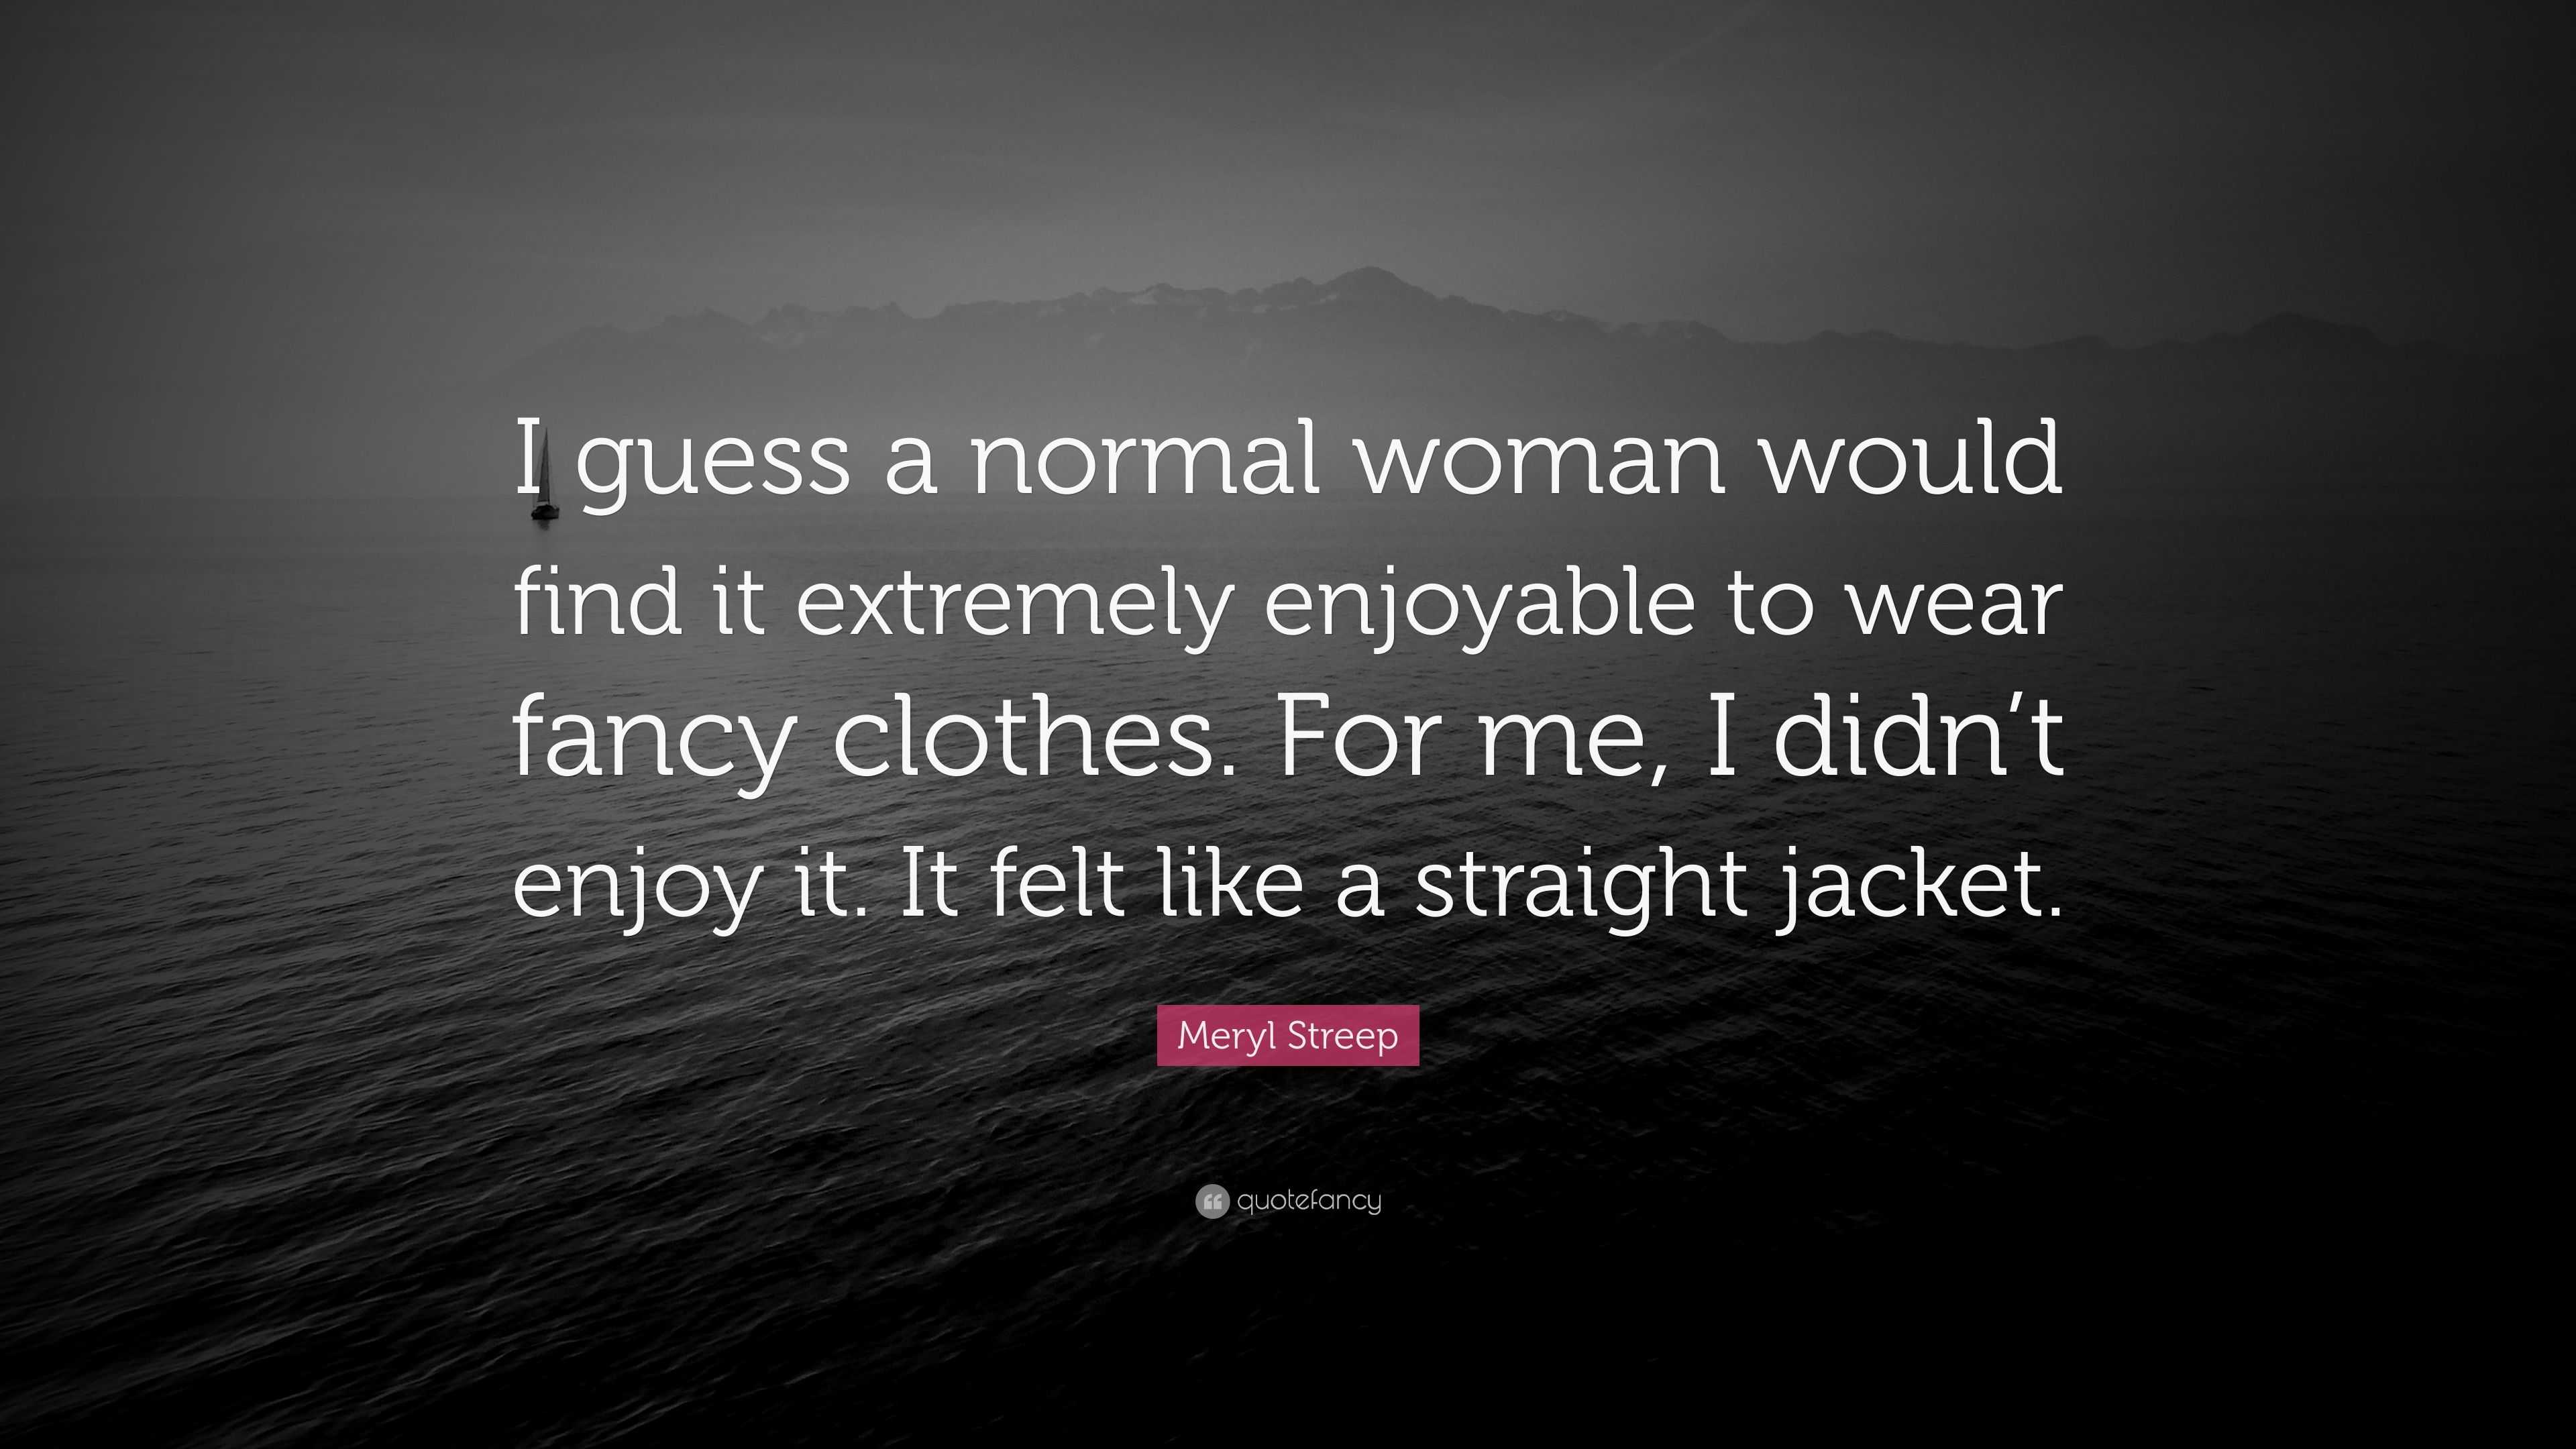 Meryl Streep Quote: “I guess a normal woman would find it extremely ...